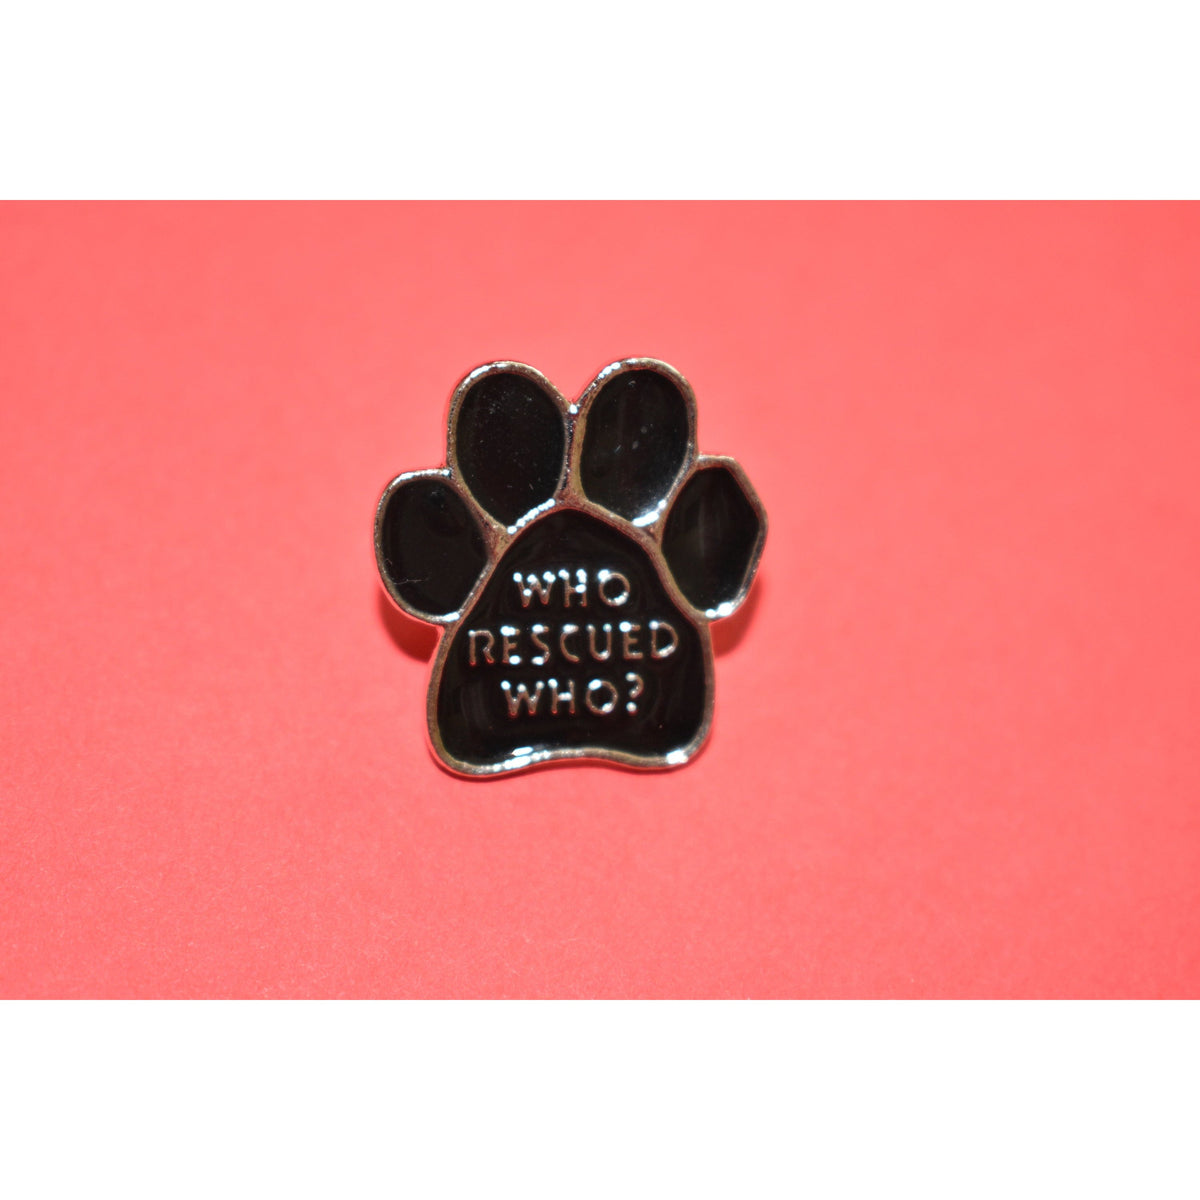 Who Rescued Who Enamel Pin